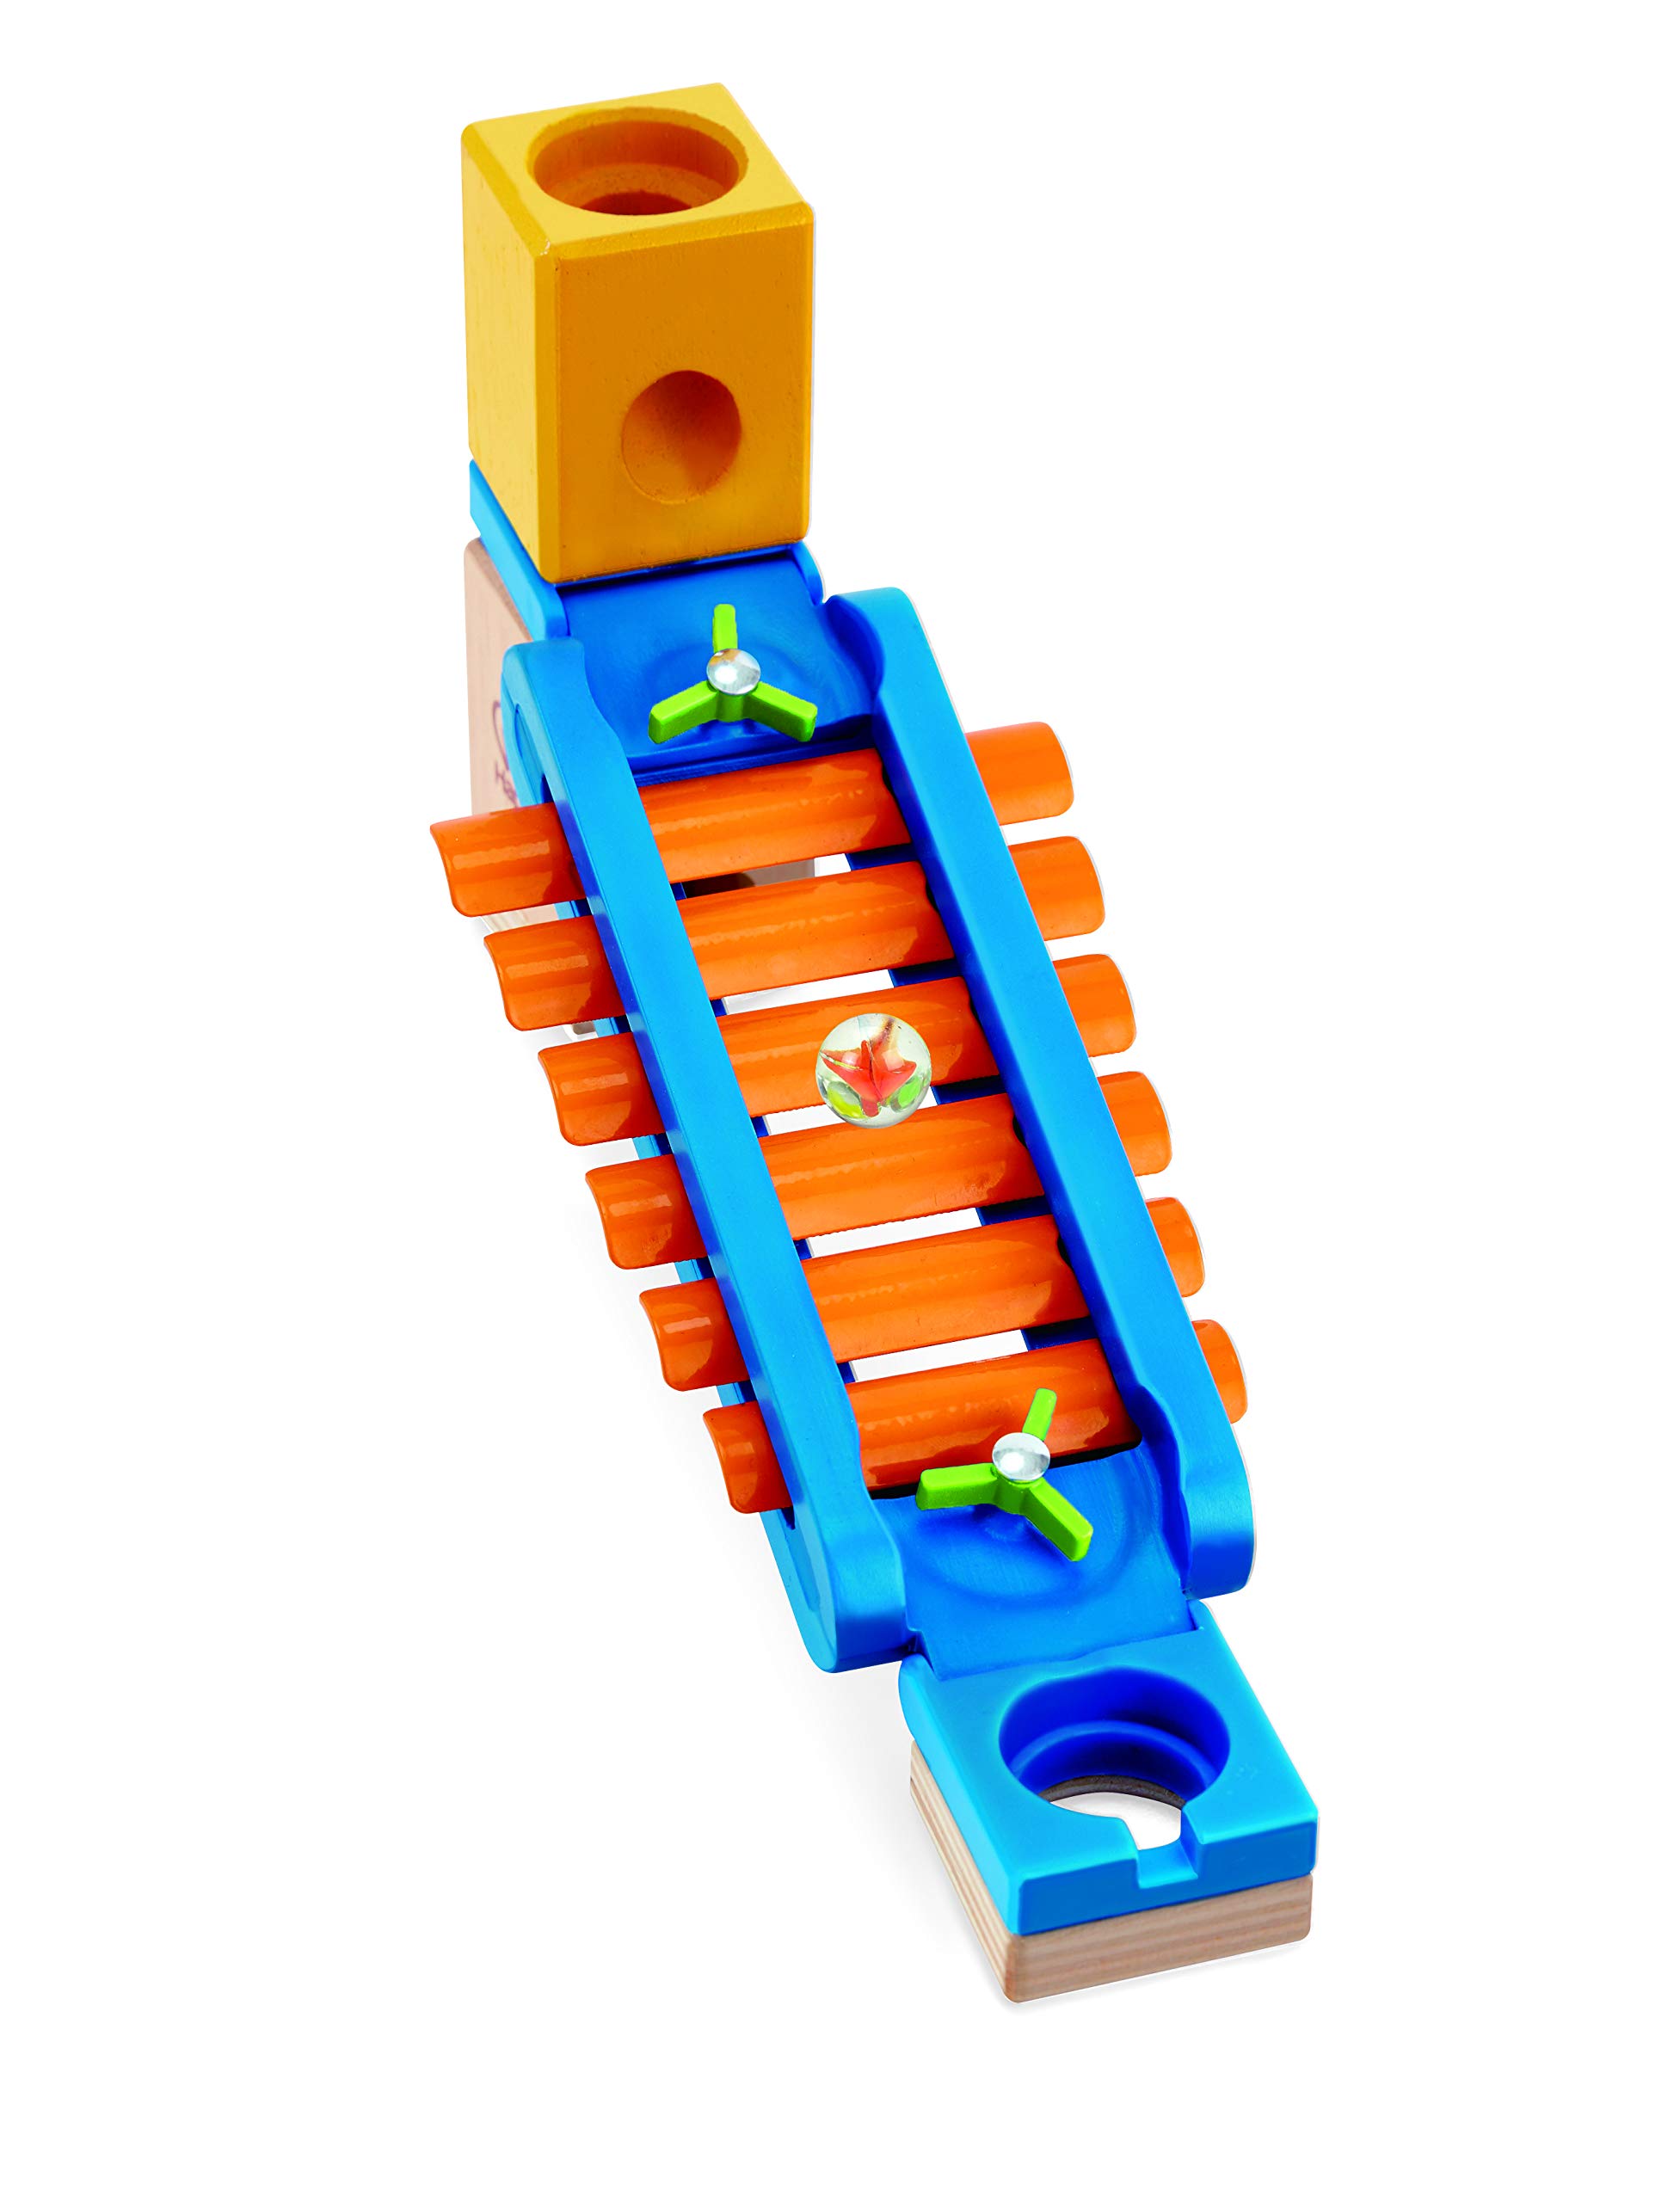 Hape E6022 Quadrilla Sonic Playground, Wooden Marble Run Accessories - Educational Construction Toys for 4 Years and Up